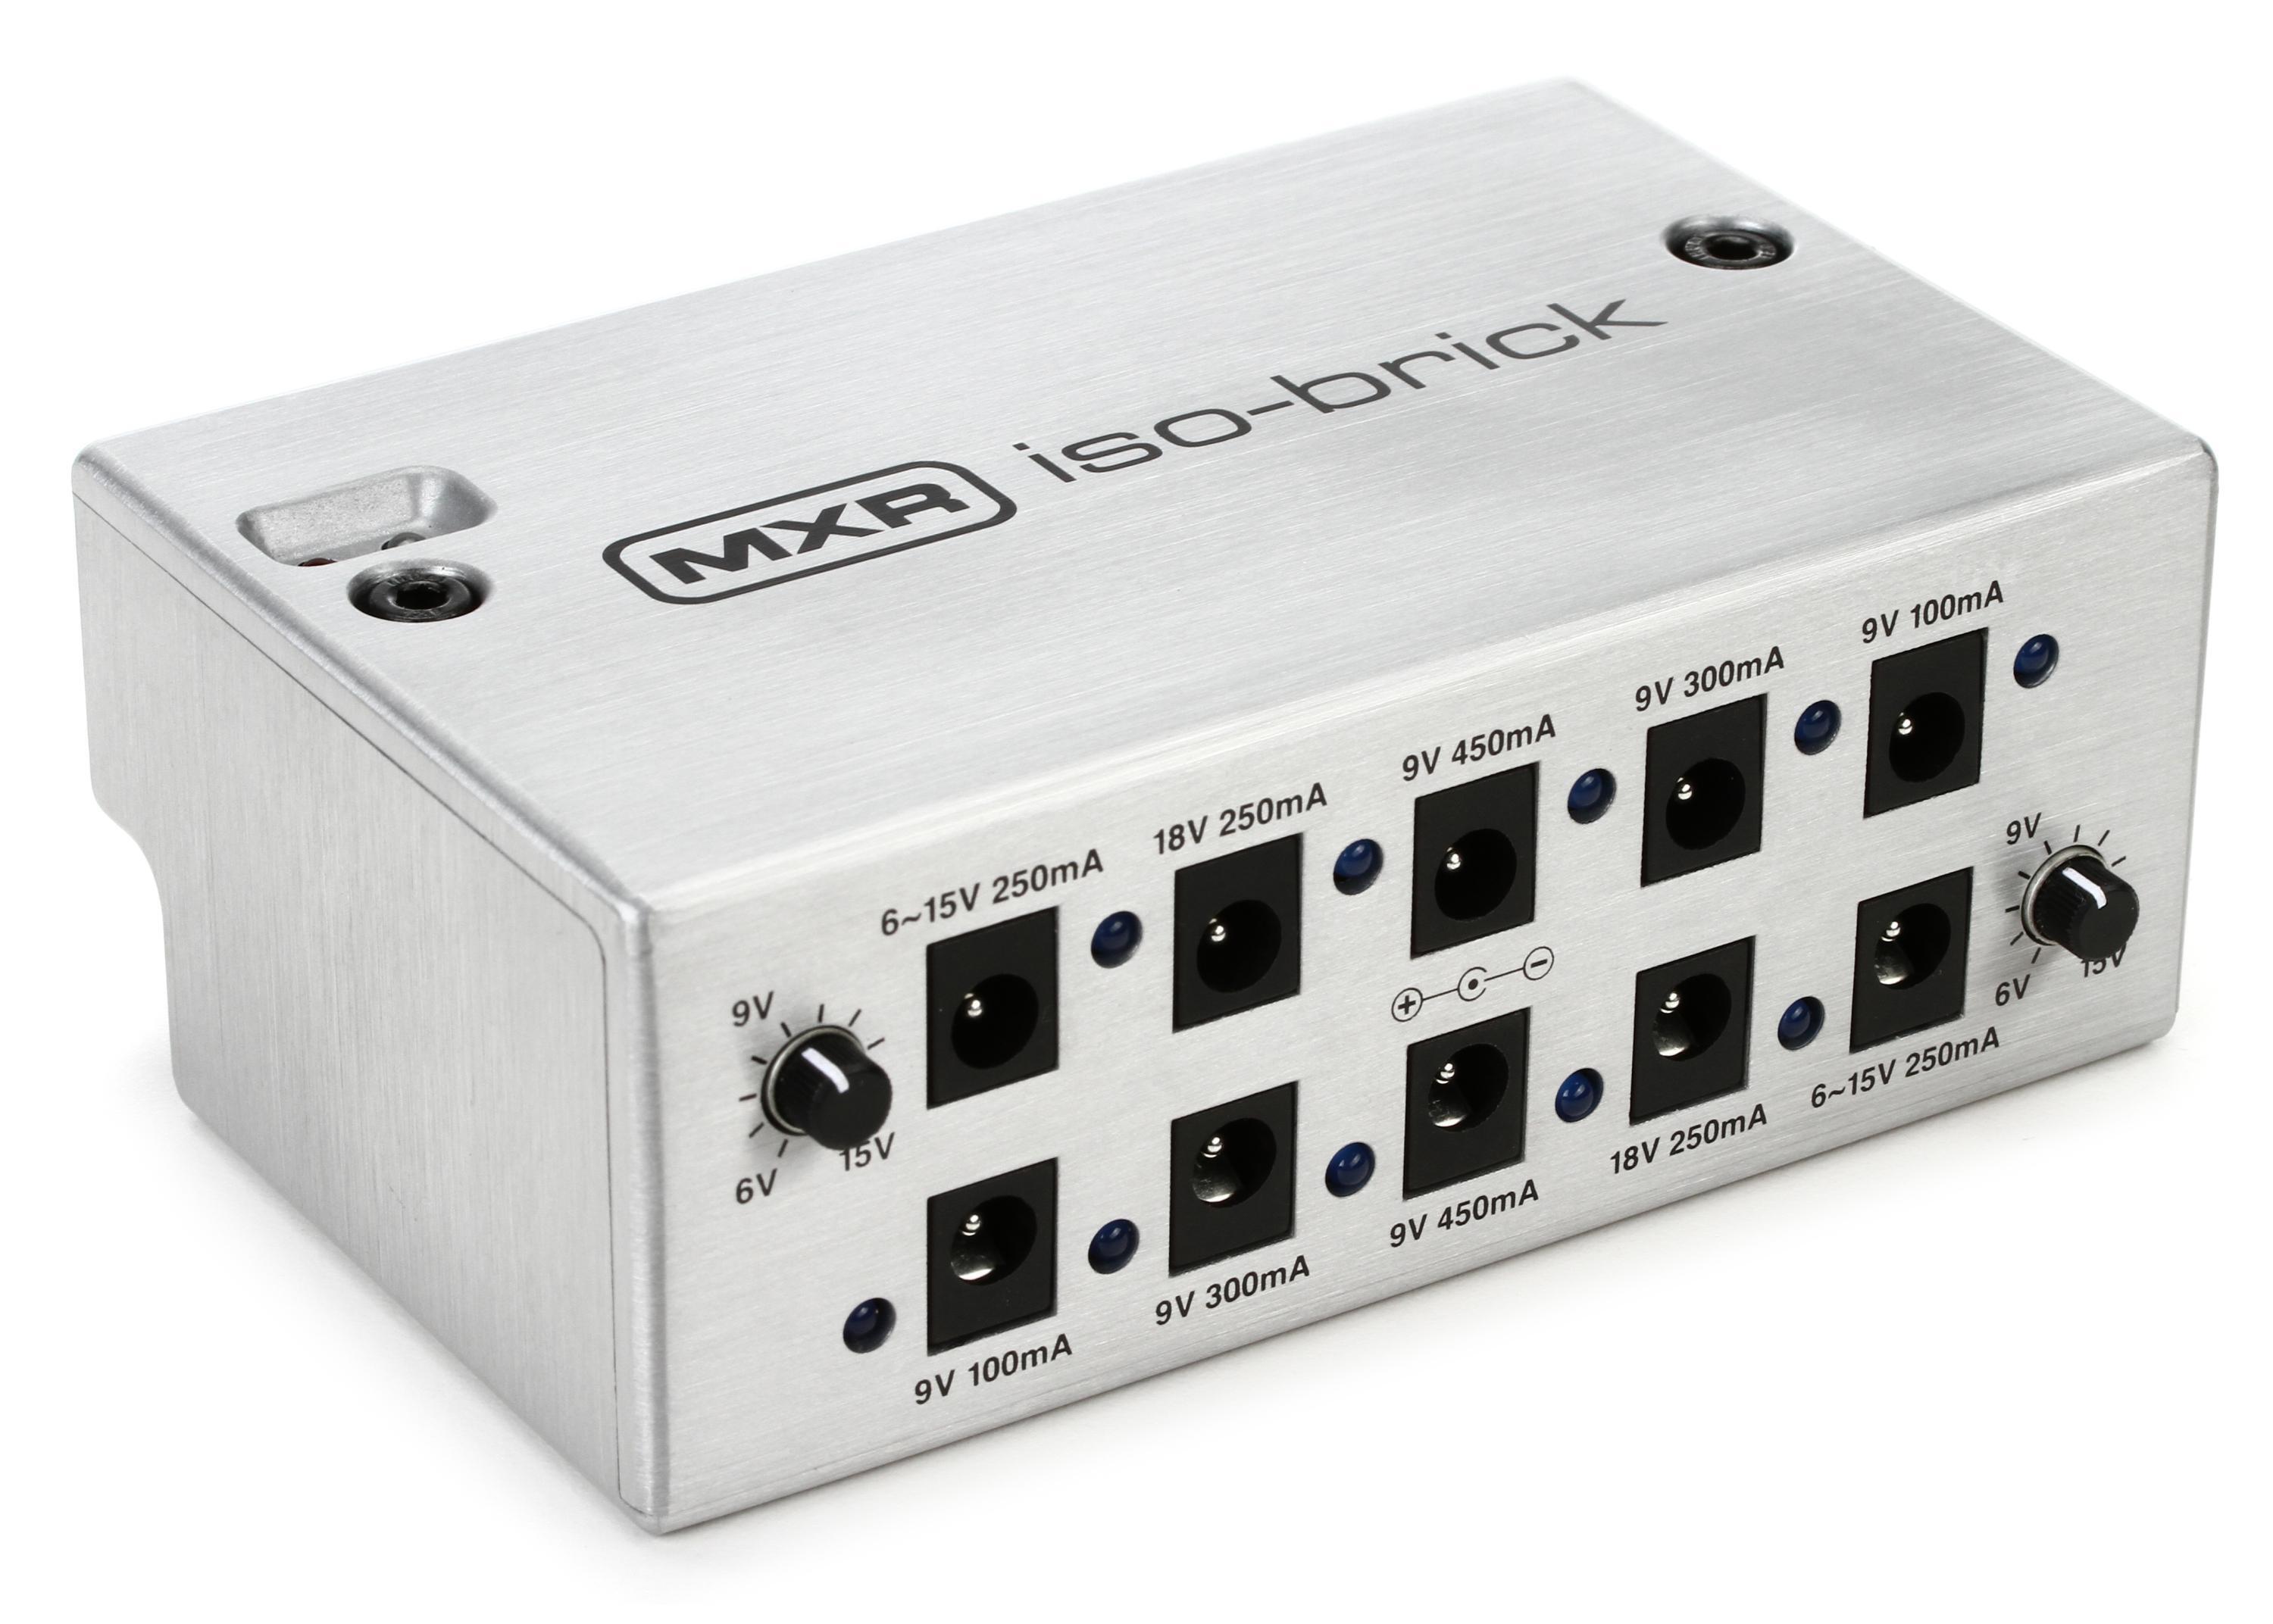 MXR M238 Iso-Brick 10-output Isolated Guitar Pedal Power Supply ...